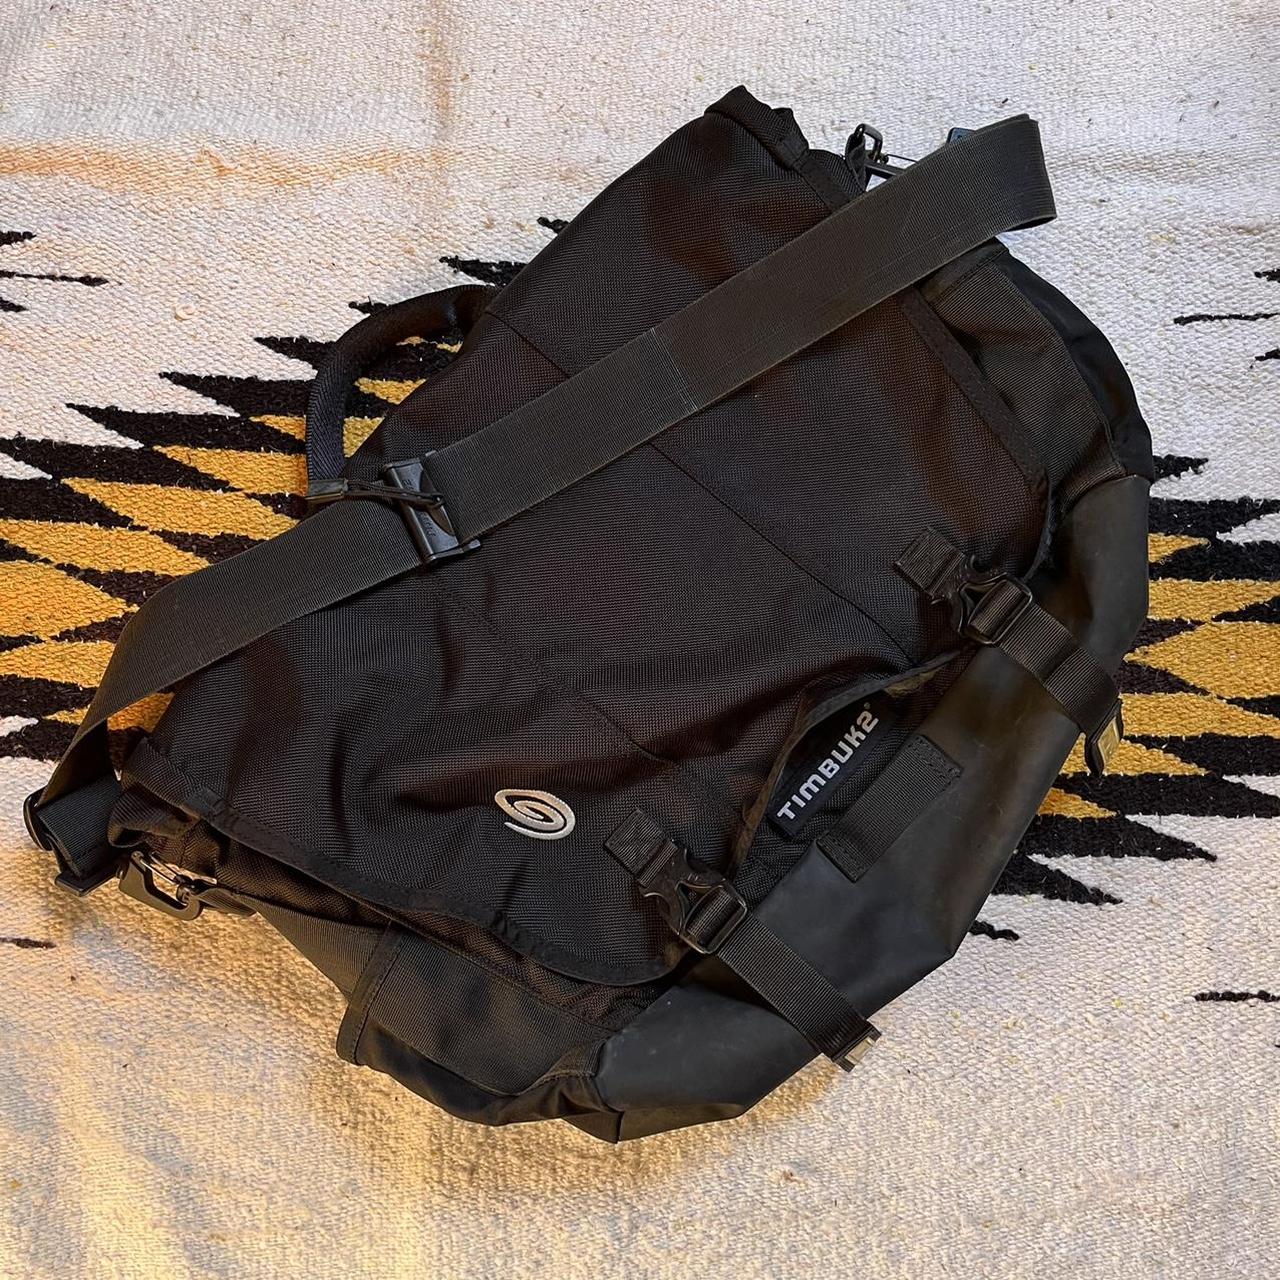 Timbuk2 commuter messenger bag. In great condition,... - Depop